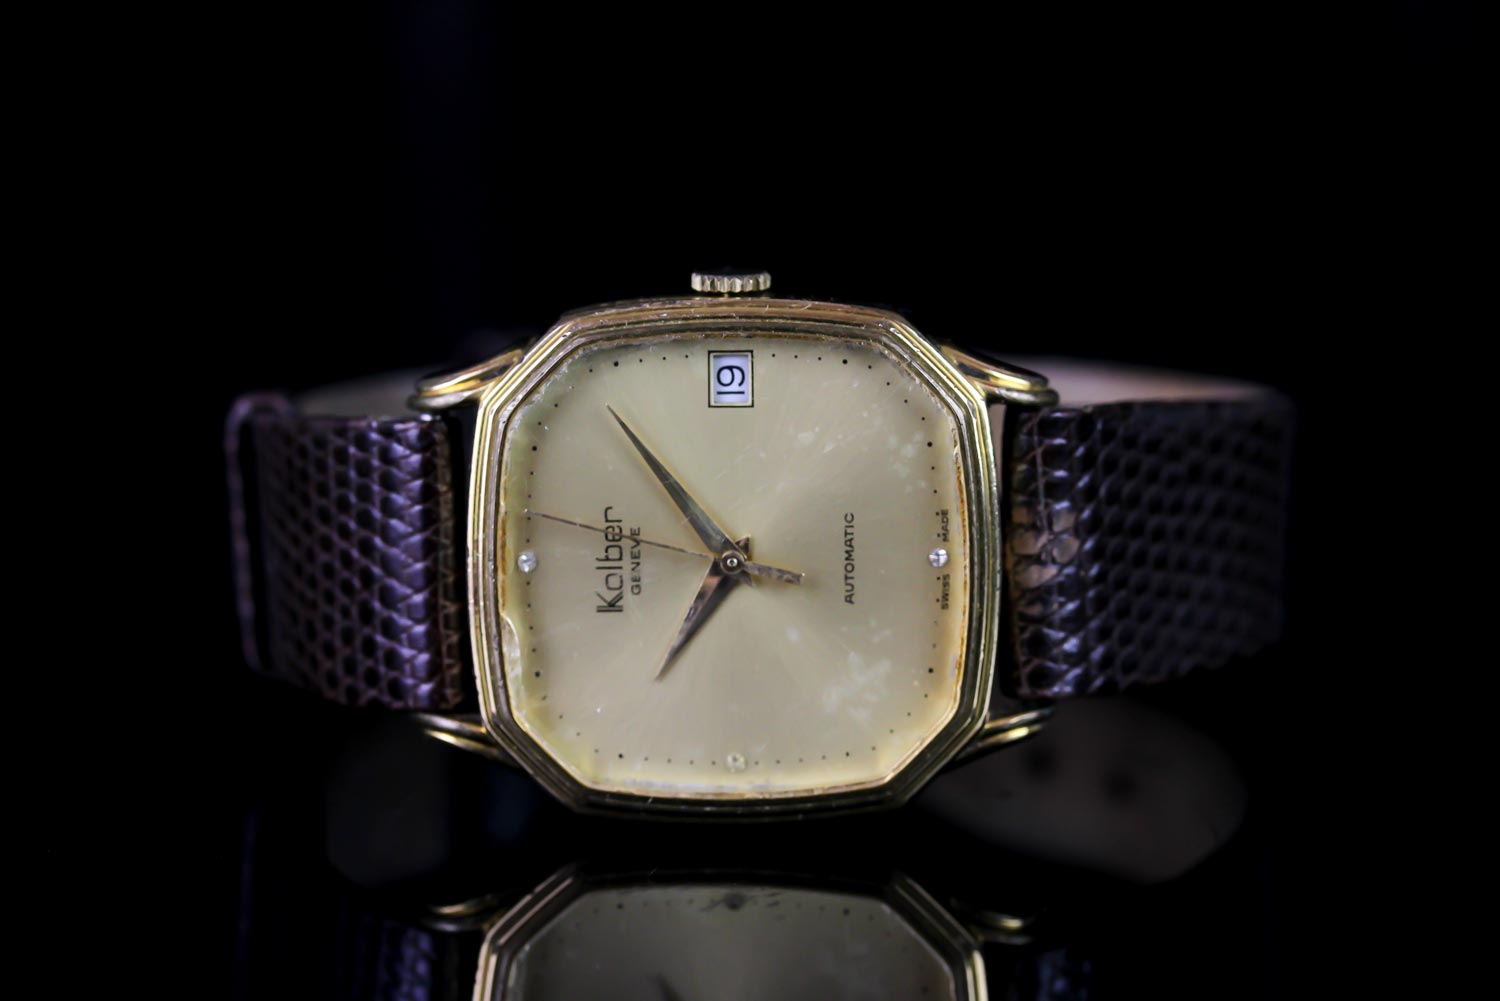 GENTS KOLBER GENEVE 2824,champagne dial and gold hands,date aperture at 3 o clock, 30 mm gold plated